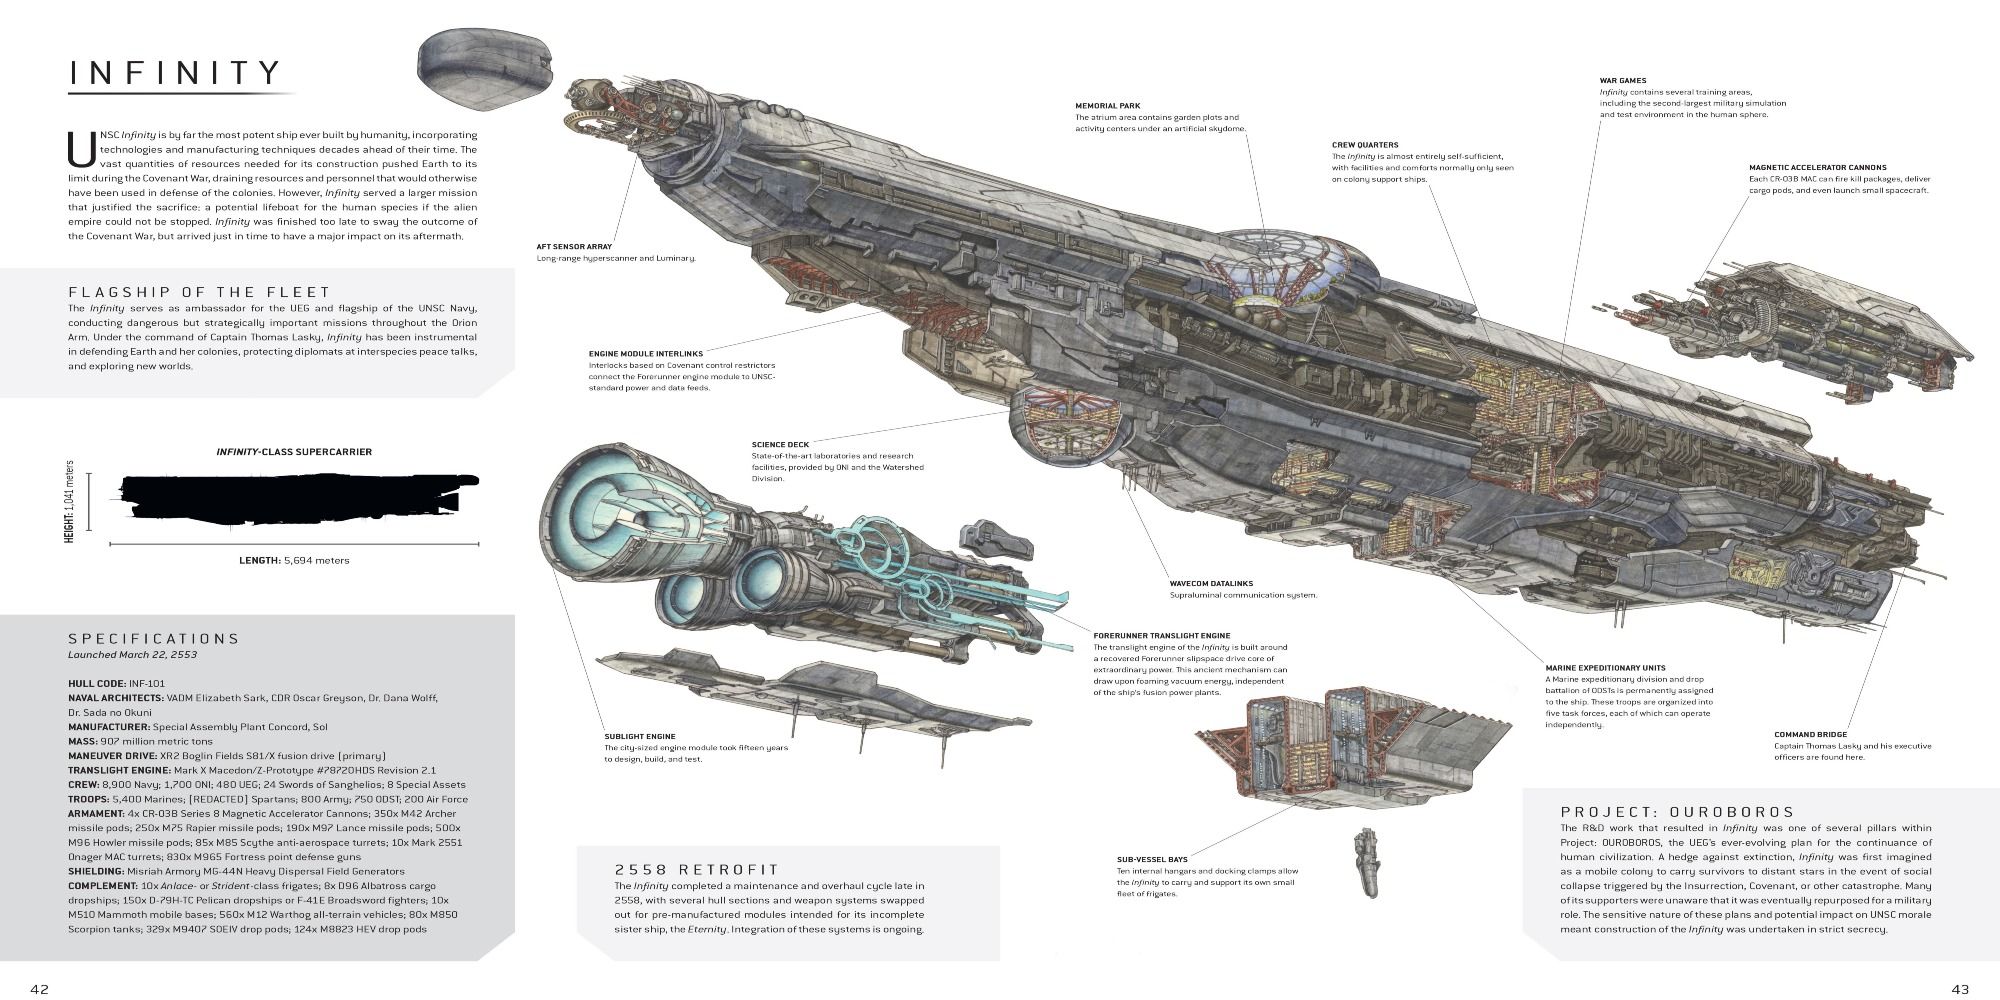 The schematics for the UNSC Infinity ship